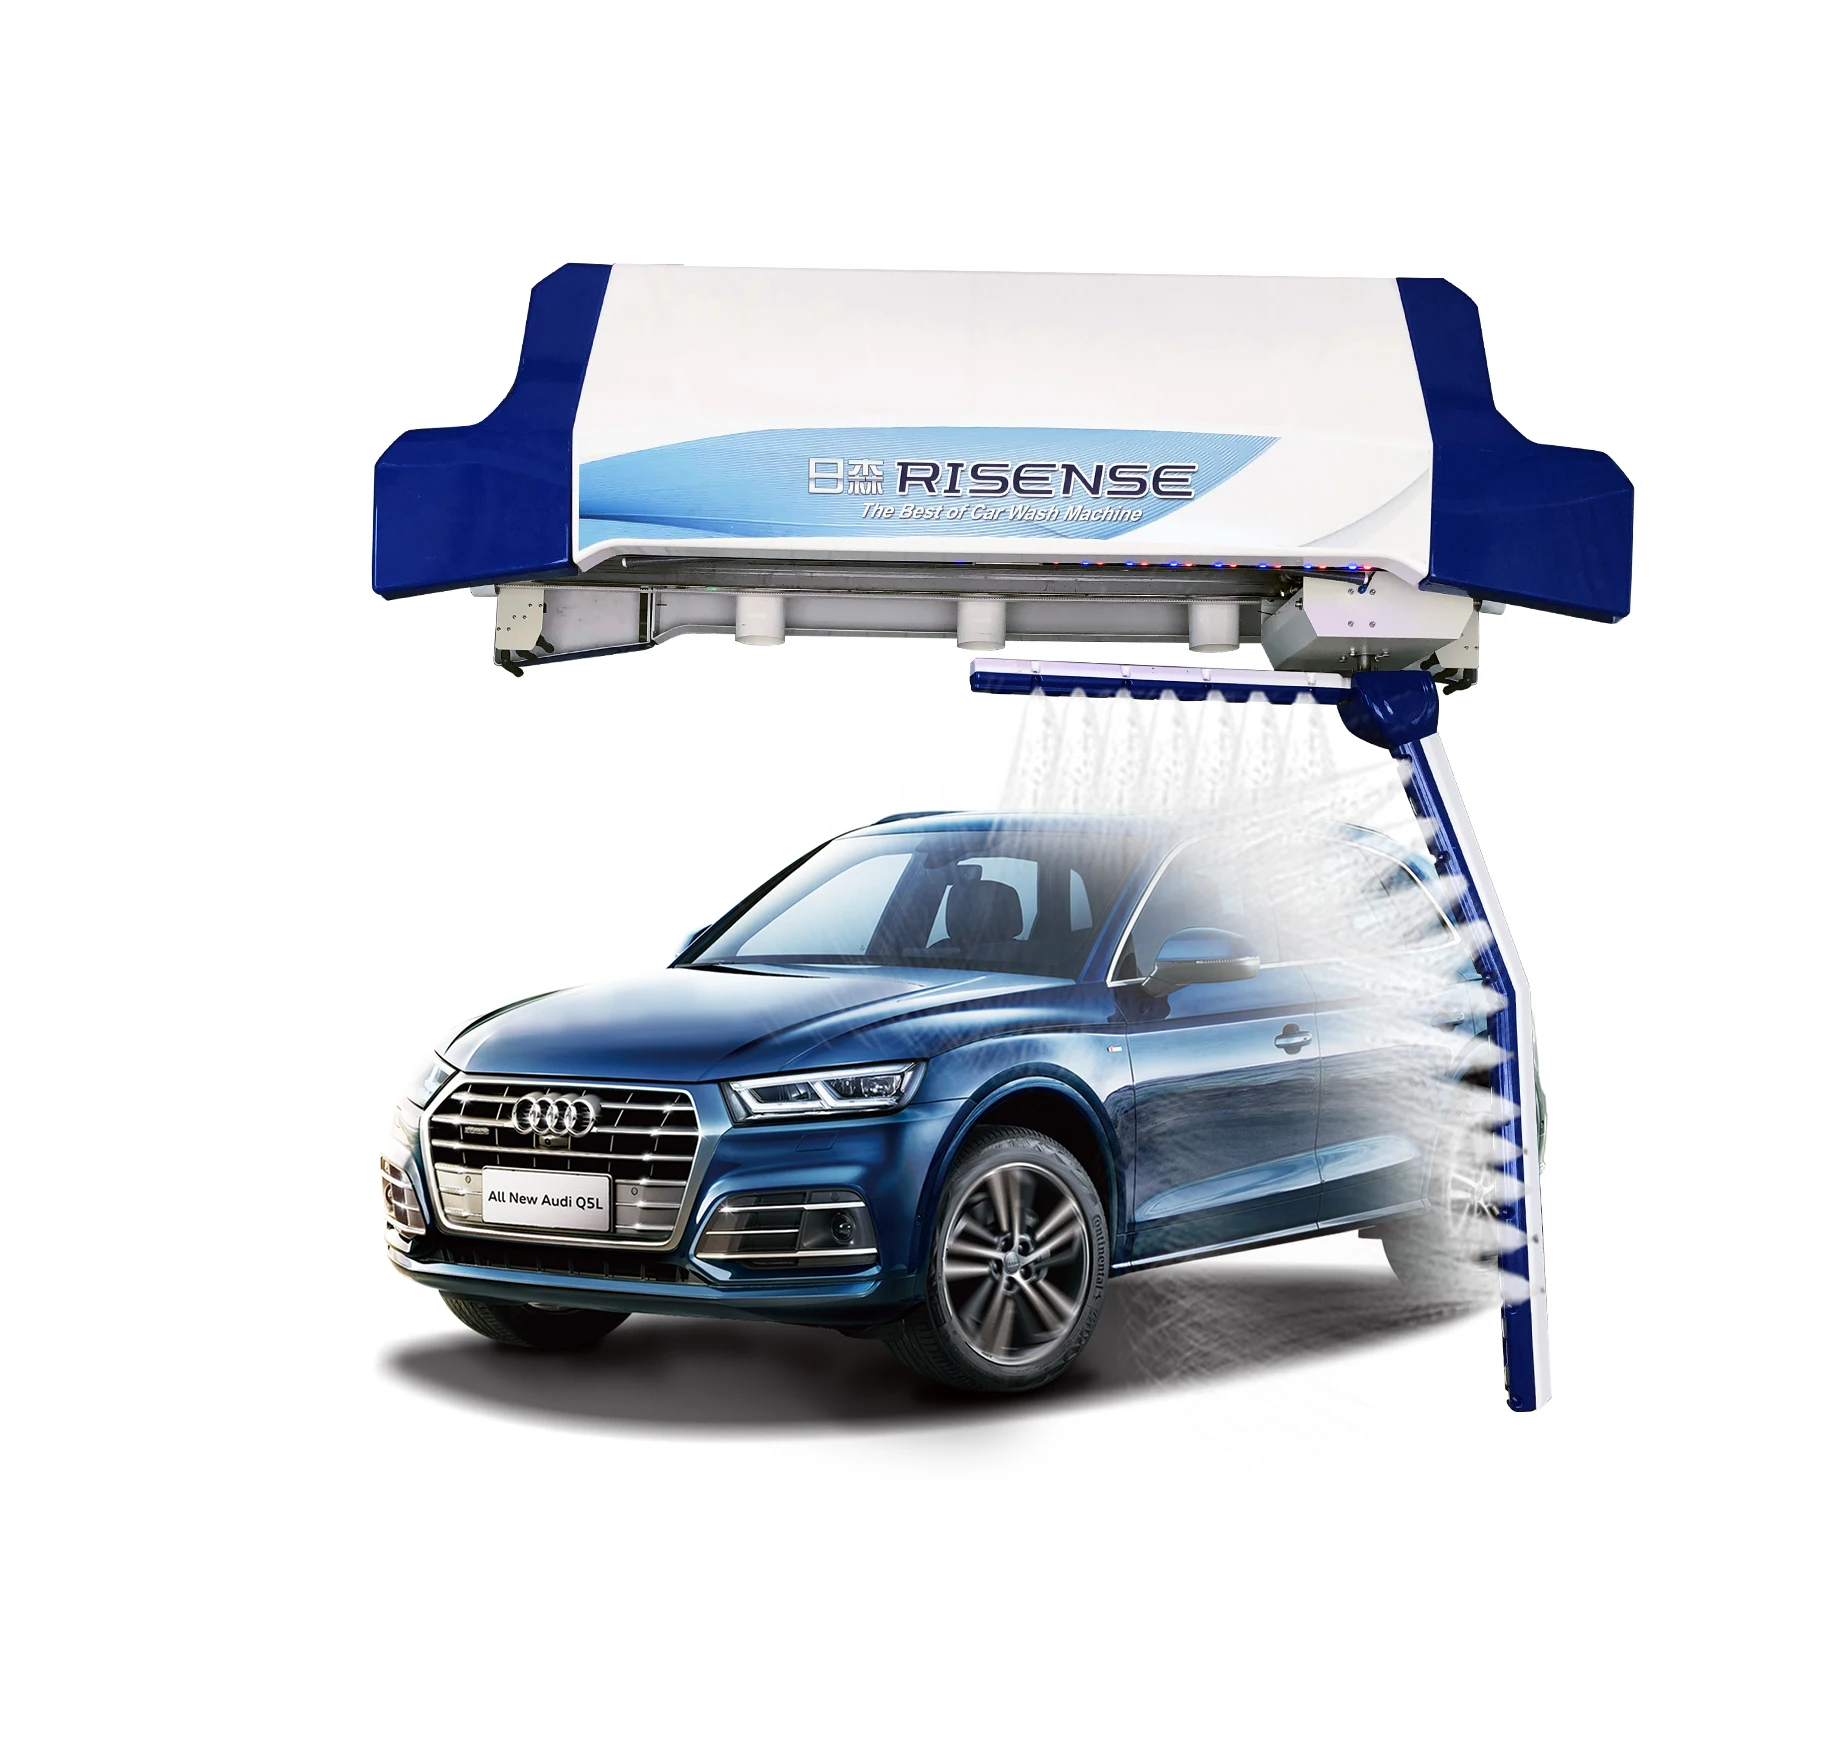 Risense Automatic Disinfecting Touchless Automatic Car Wash Machine System Equipment Station Tunnel (1600572333453)